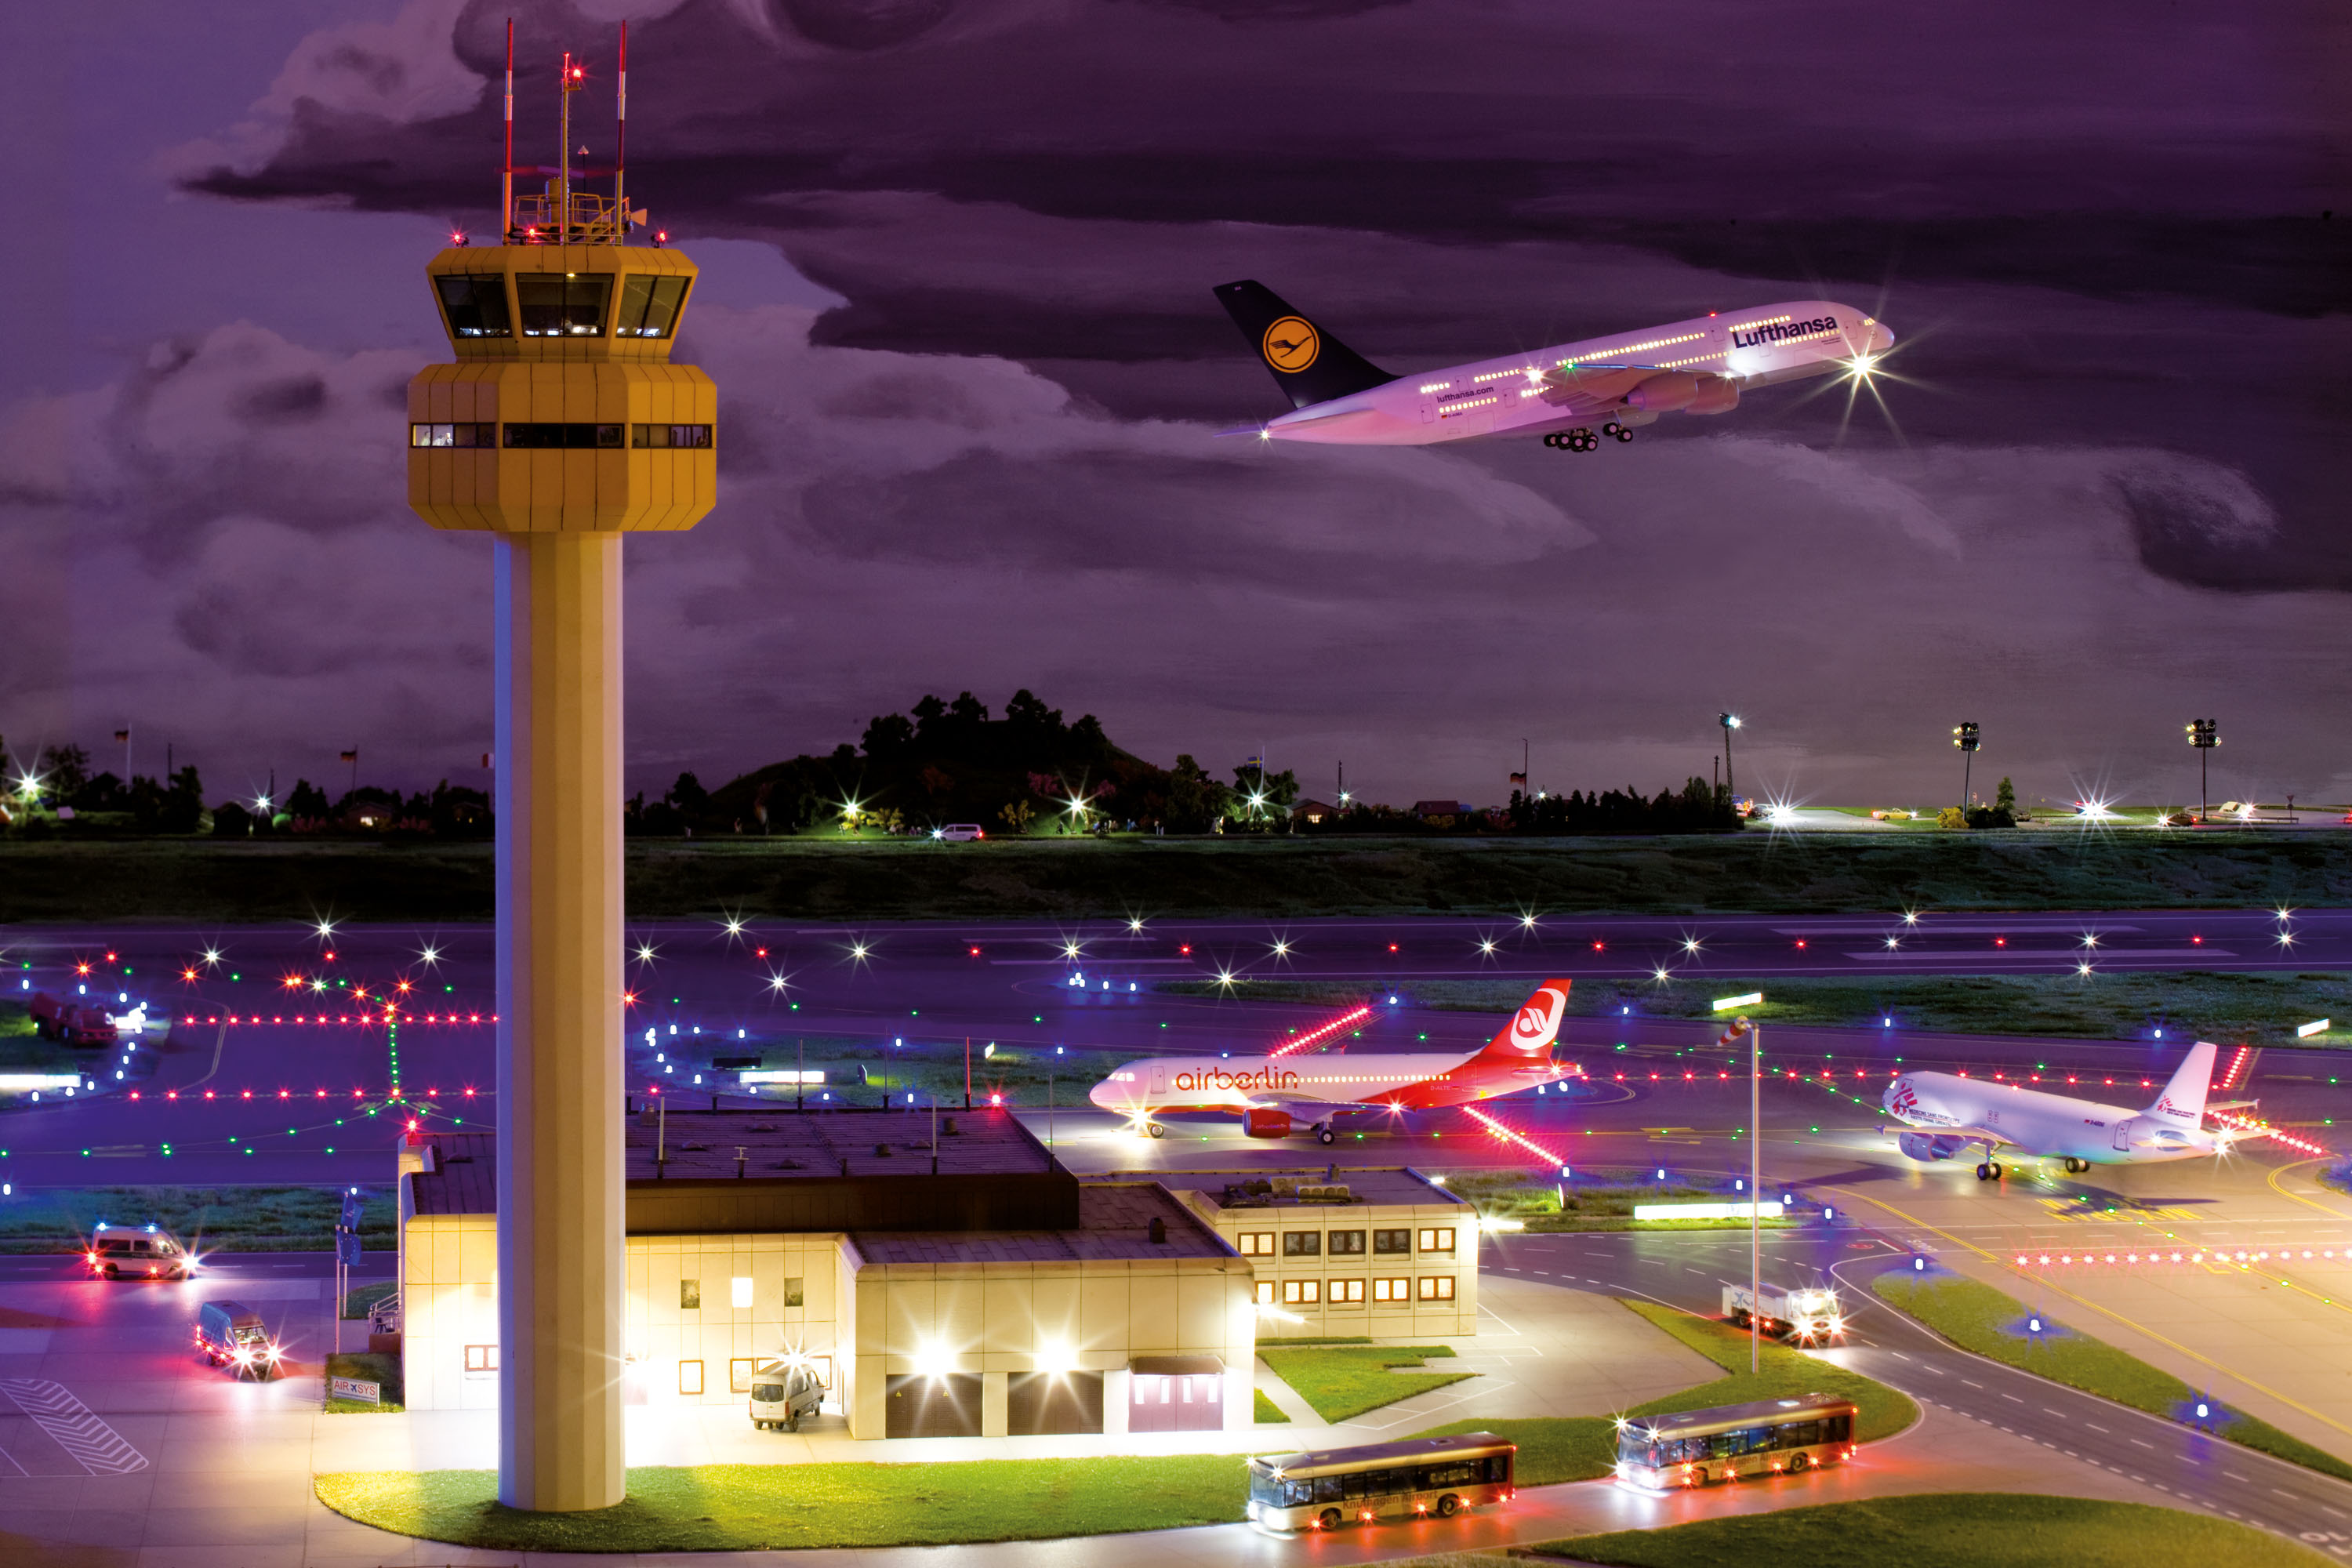 Model Airport Diorama - The World of Aviation with Moving Planes and Aircraft at Miniatur Wunderland